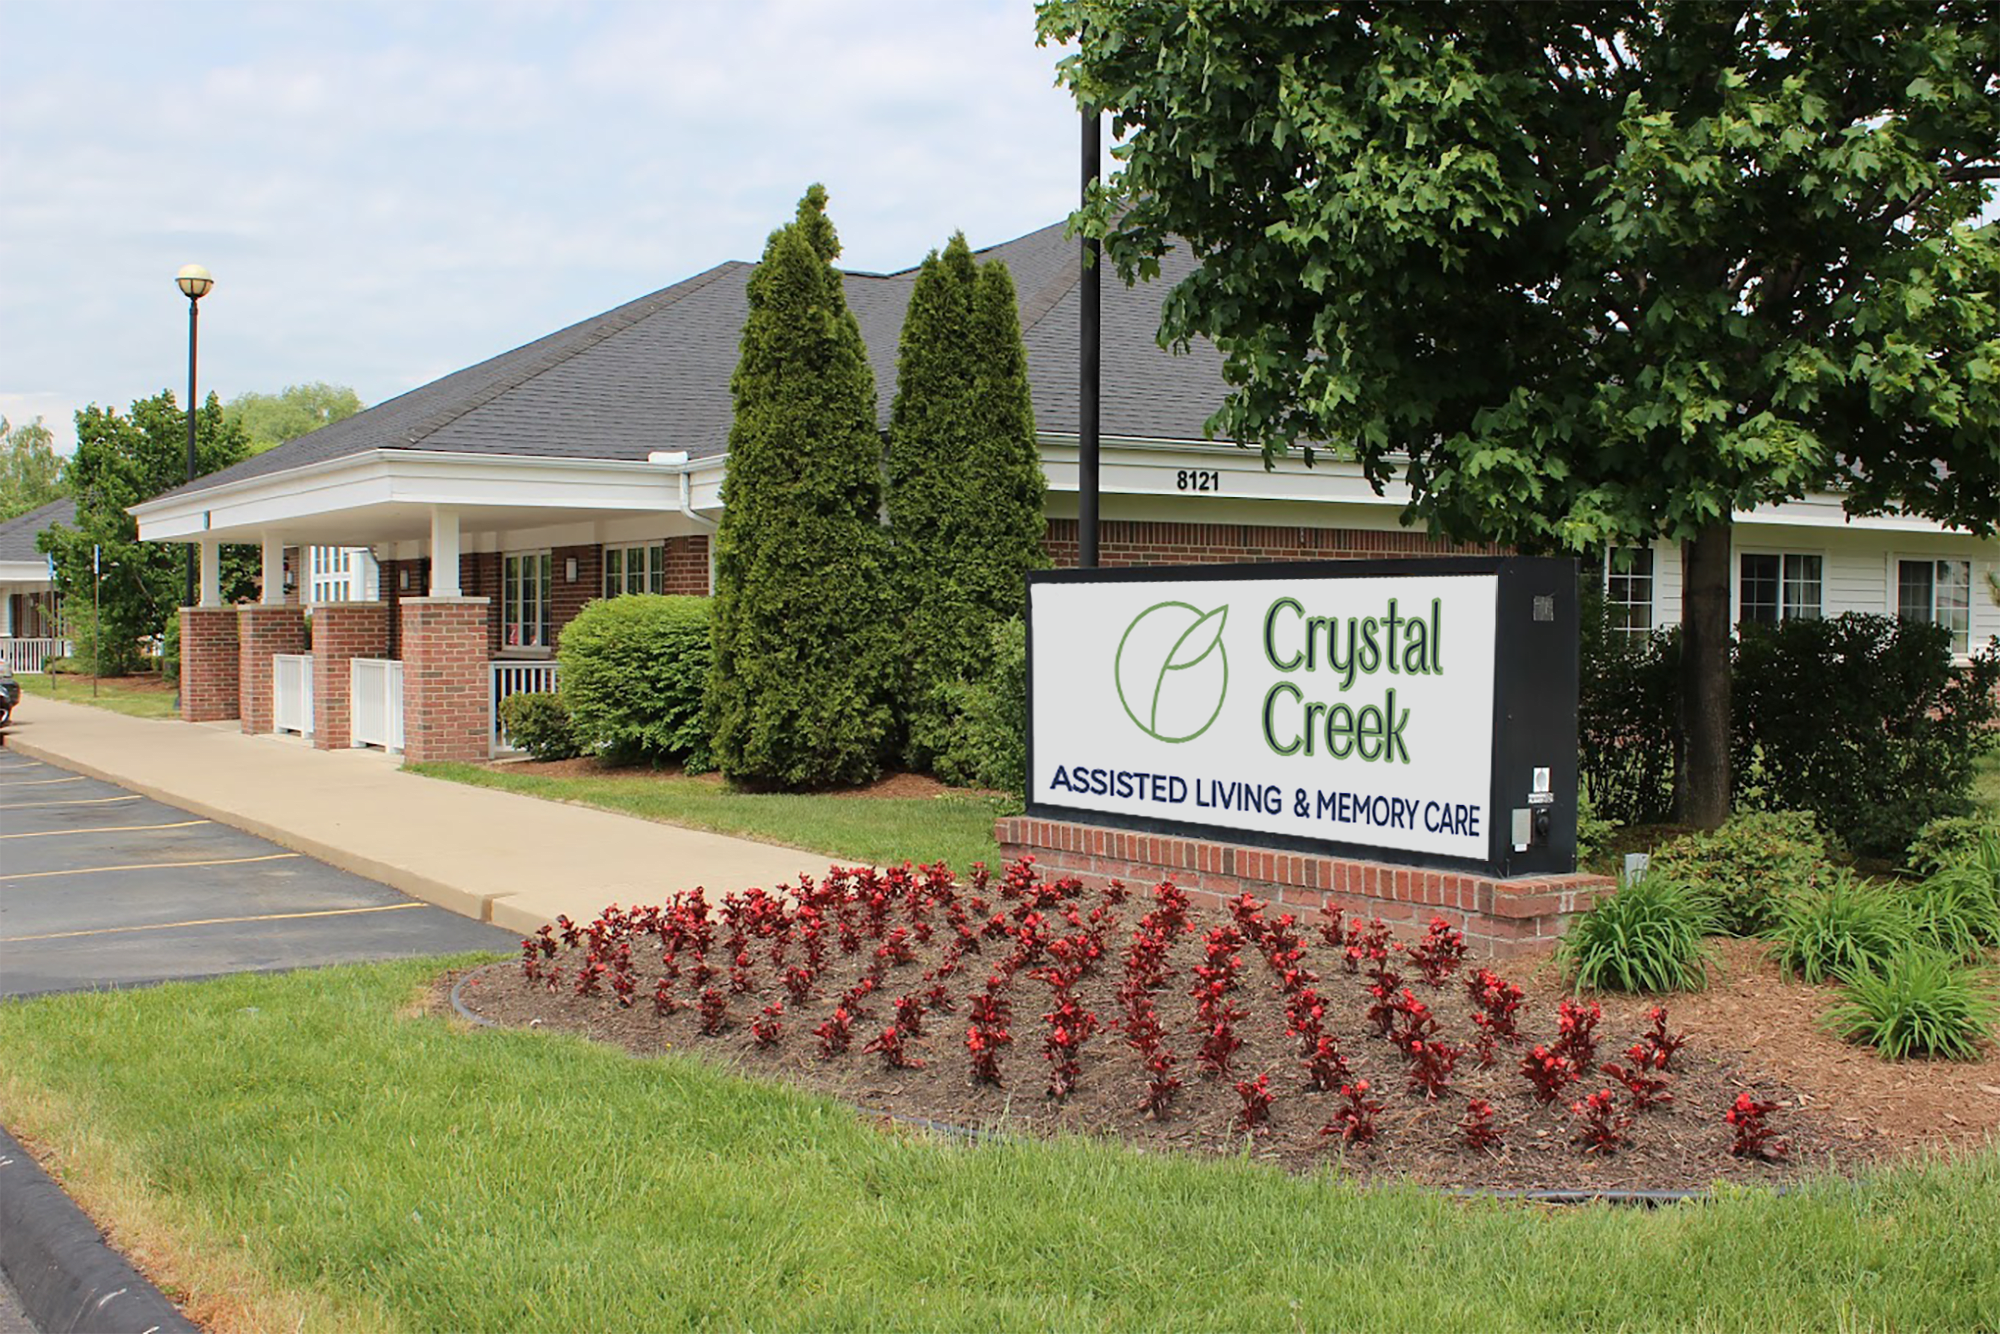 Crystal Creek Assisted Living and Memory Care